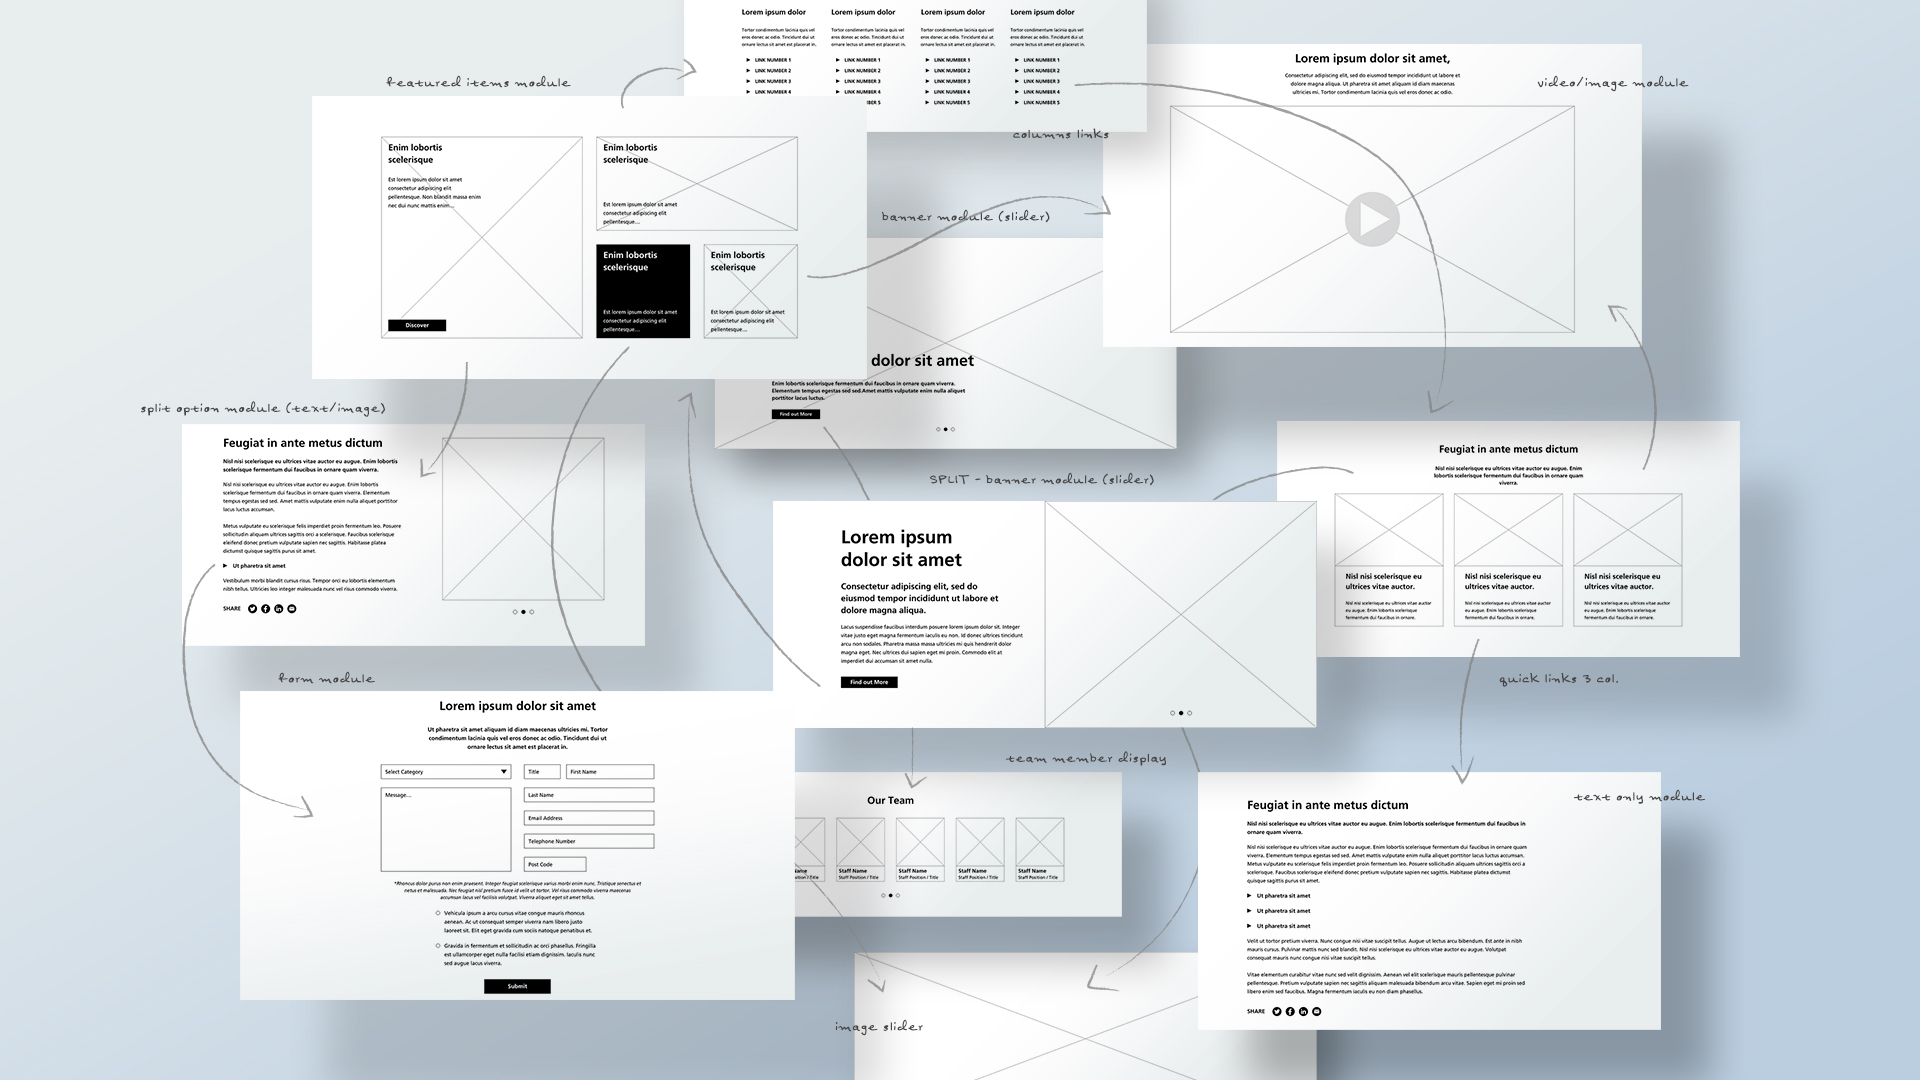 An image to show the wireframes for the ICB website